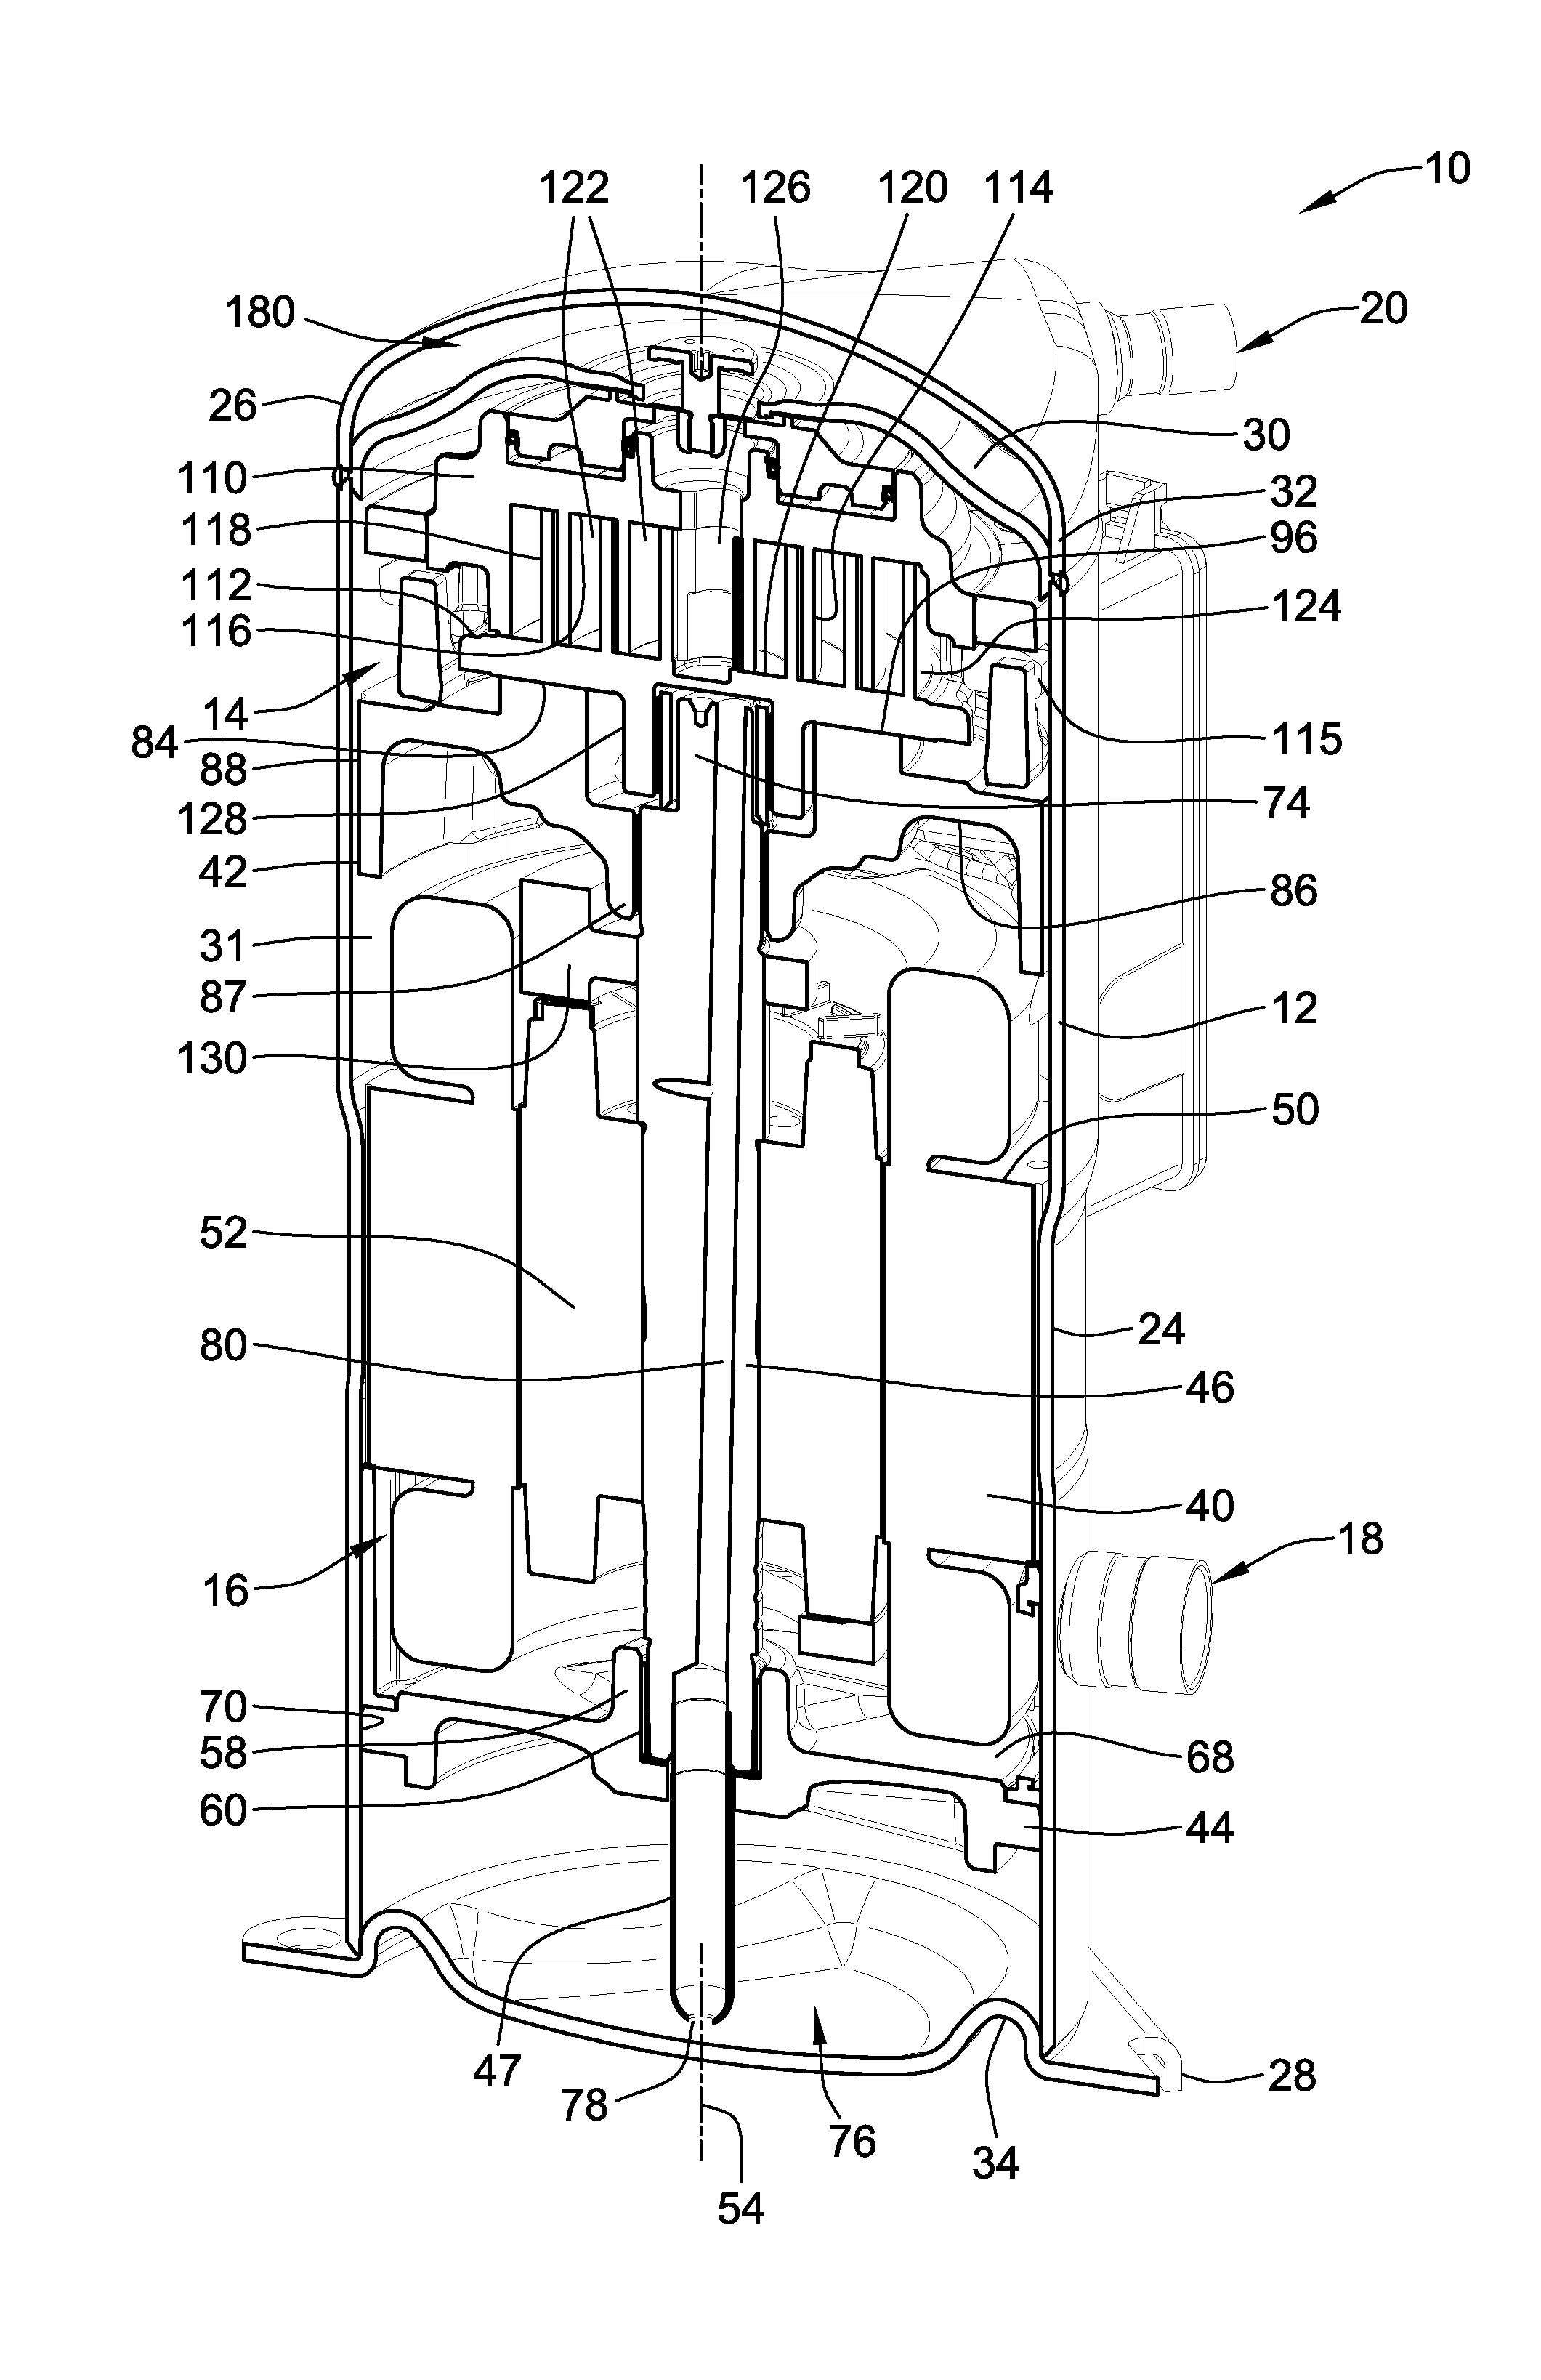 Scroll compressor with captured thrust washer